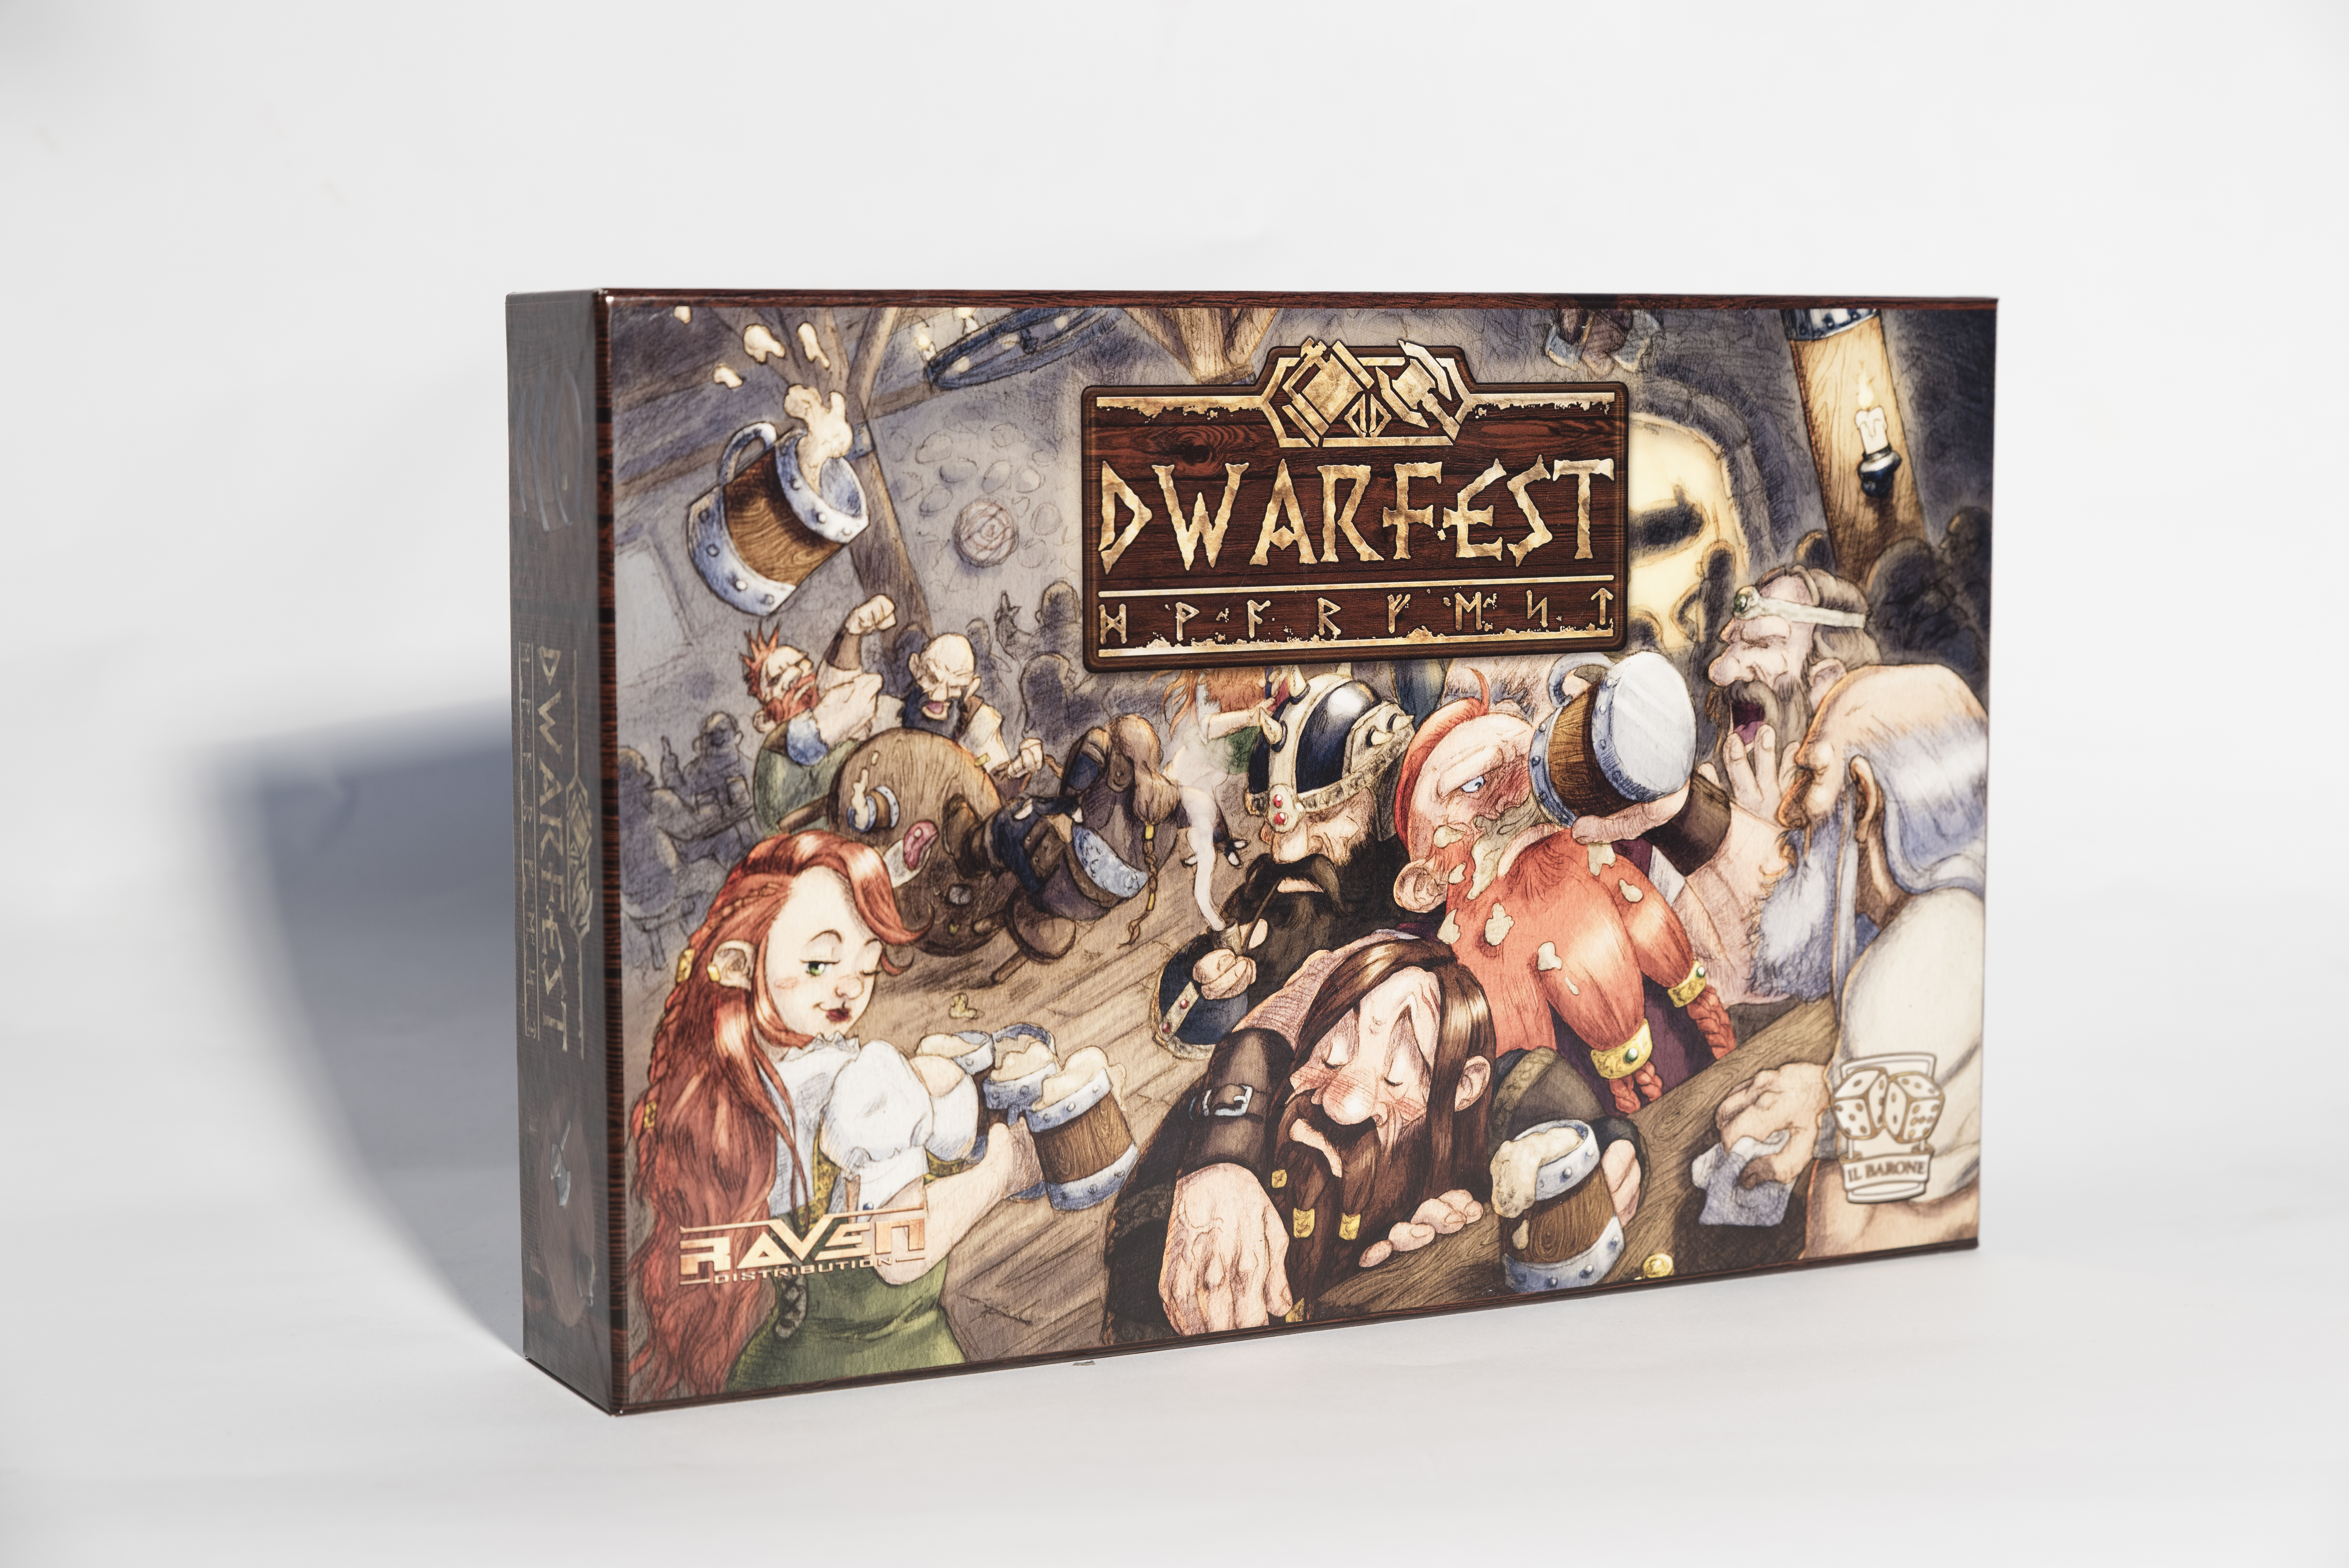 Dwarfest - Business simulation of a dwarven tavern, with drinking mode